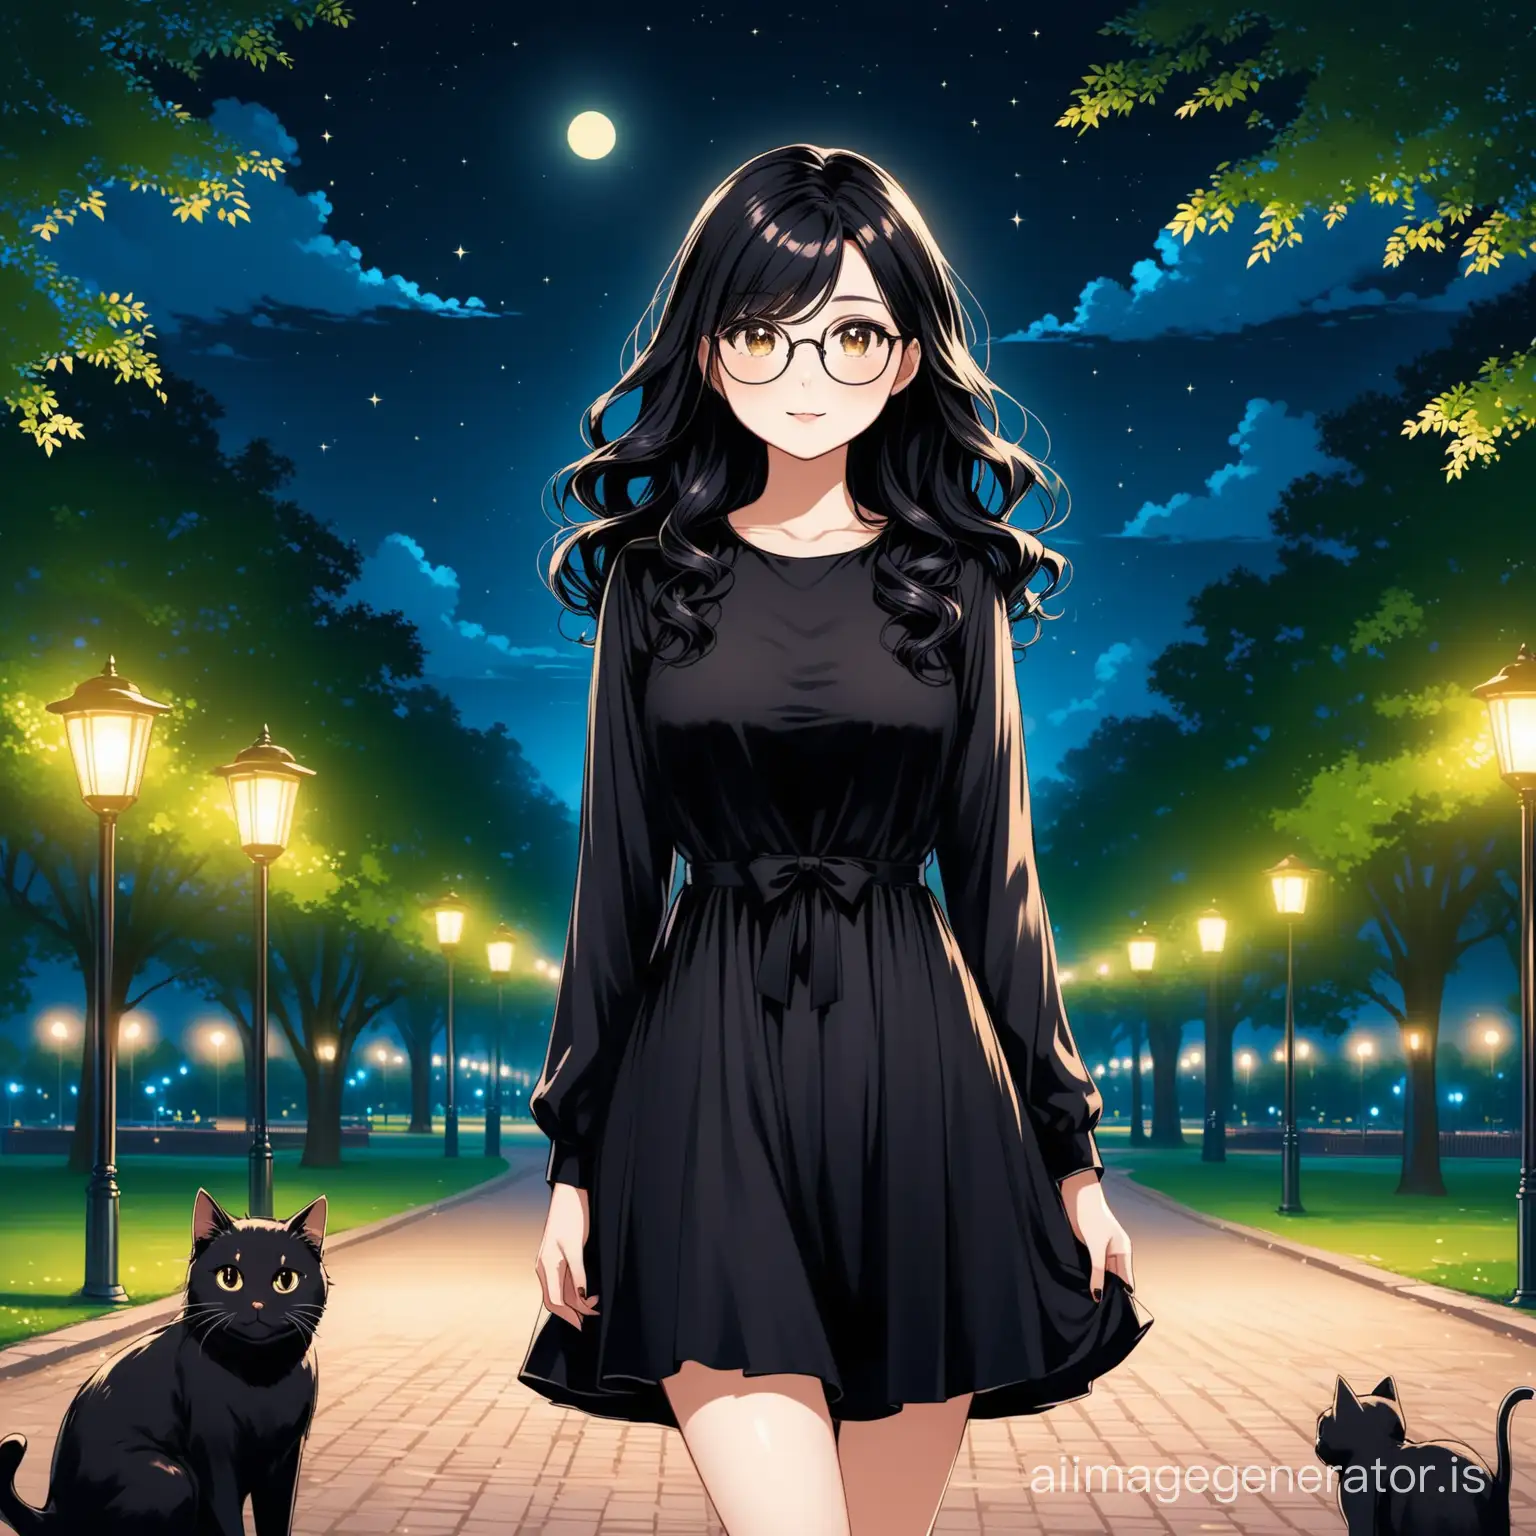 Night-Park-Encounter-Girl-with-Black-Hair-Dress-Glasses-and-Cat